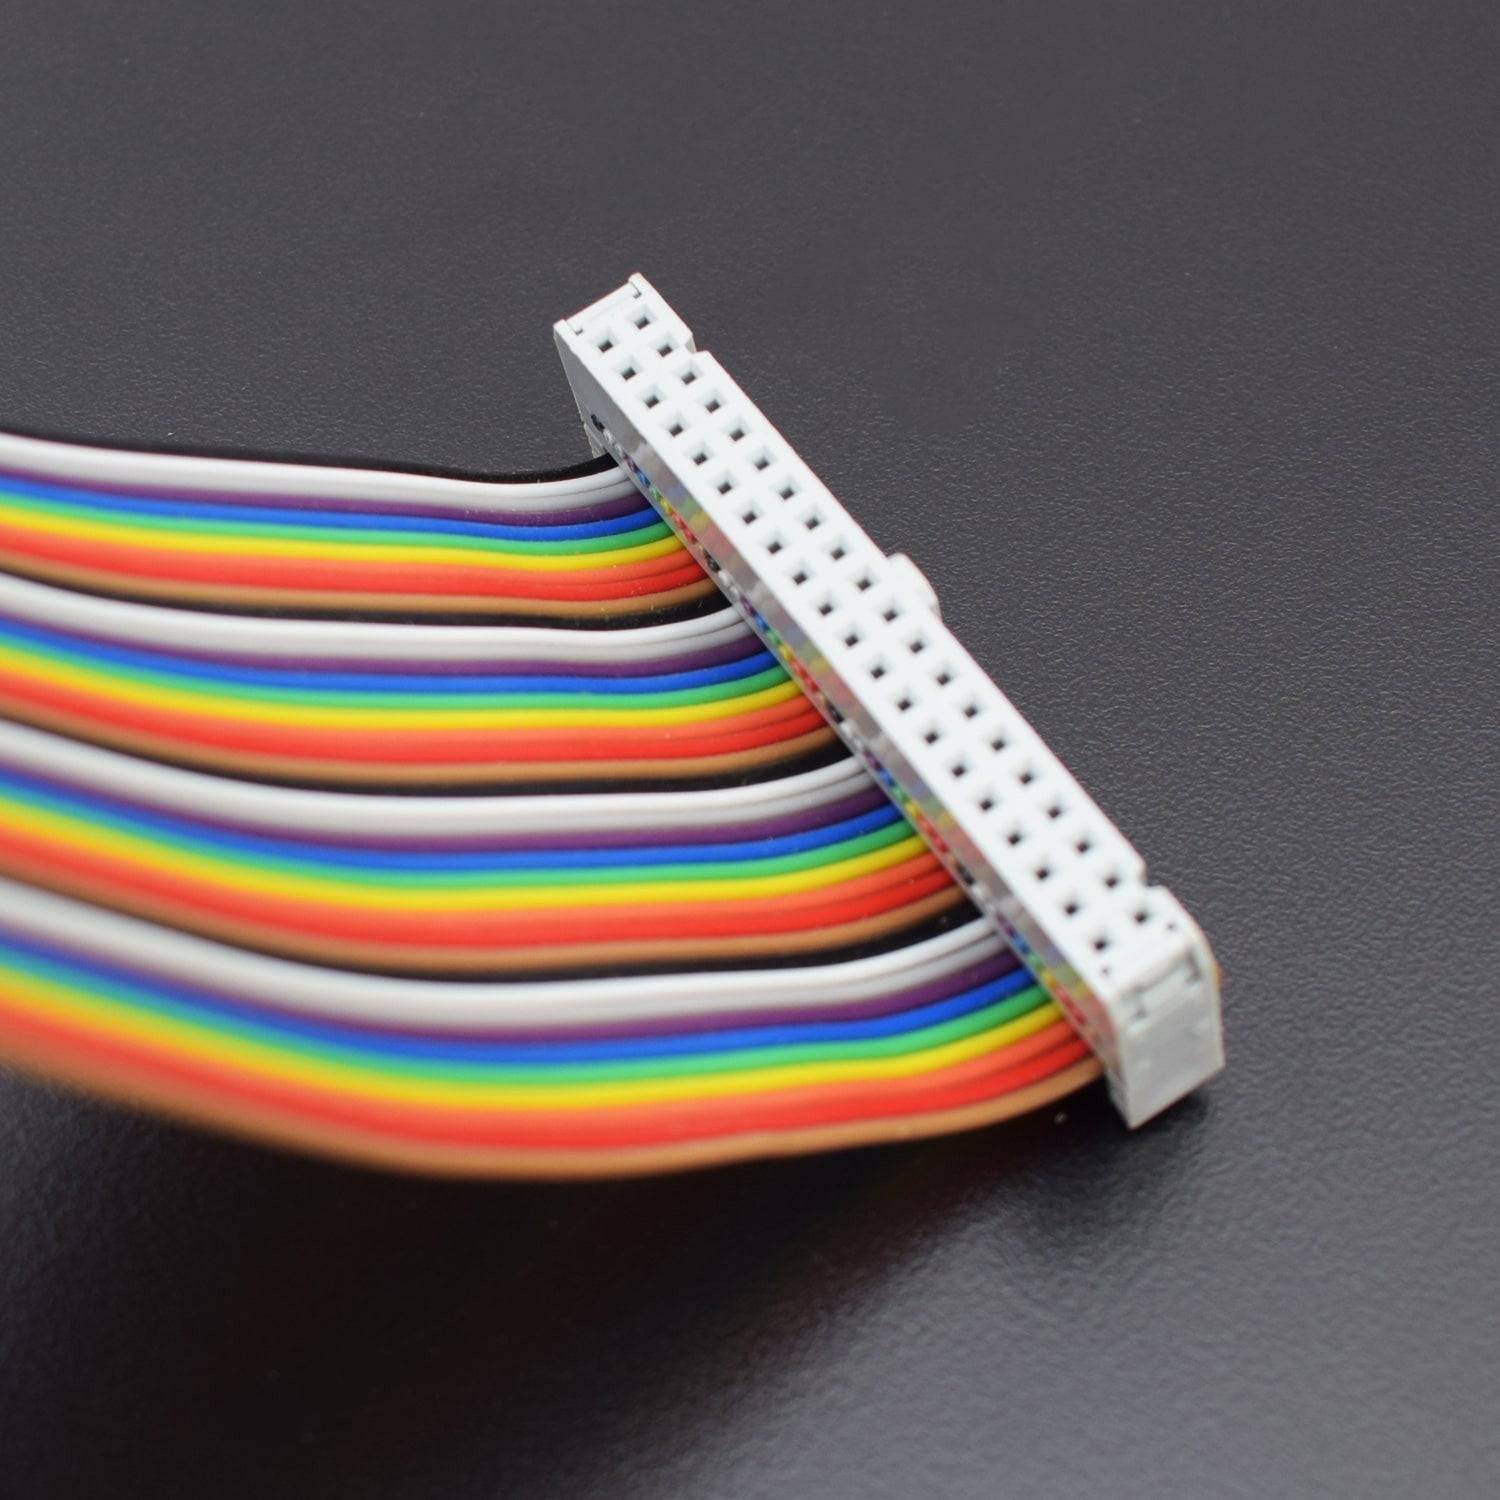 GPIO 40 Pin Colorful Rainbow Female to Female Ribbon Cable For Raspberry Pi 3 Model B and B+ - RP001 - REES52